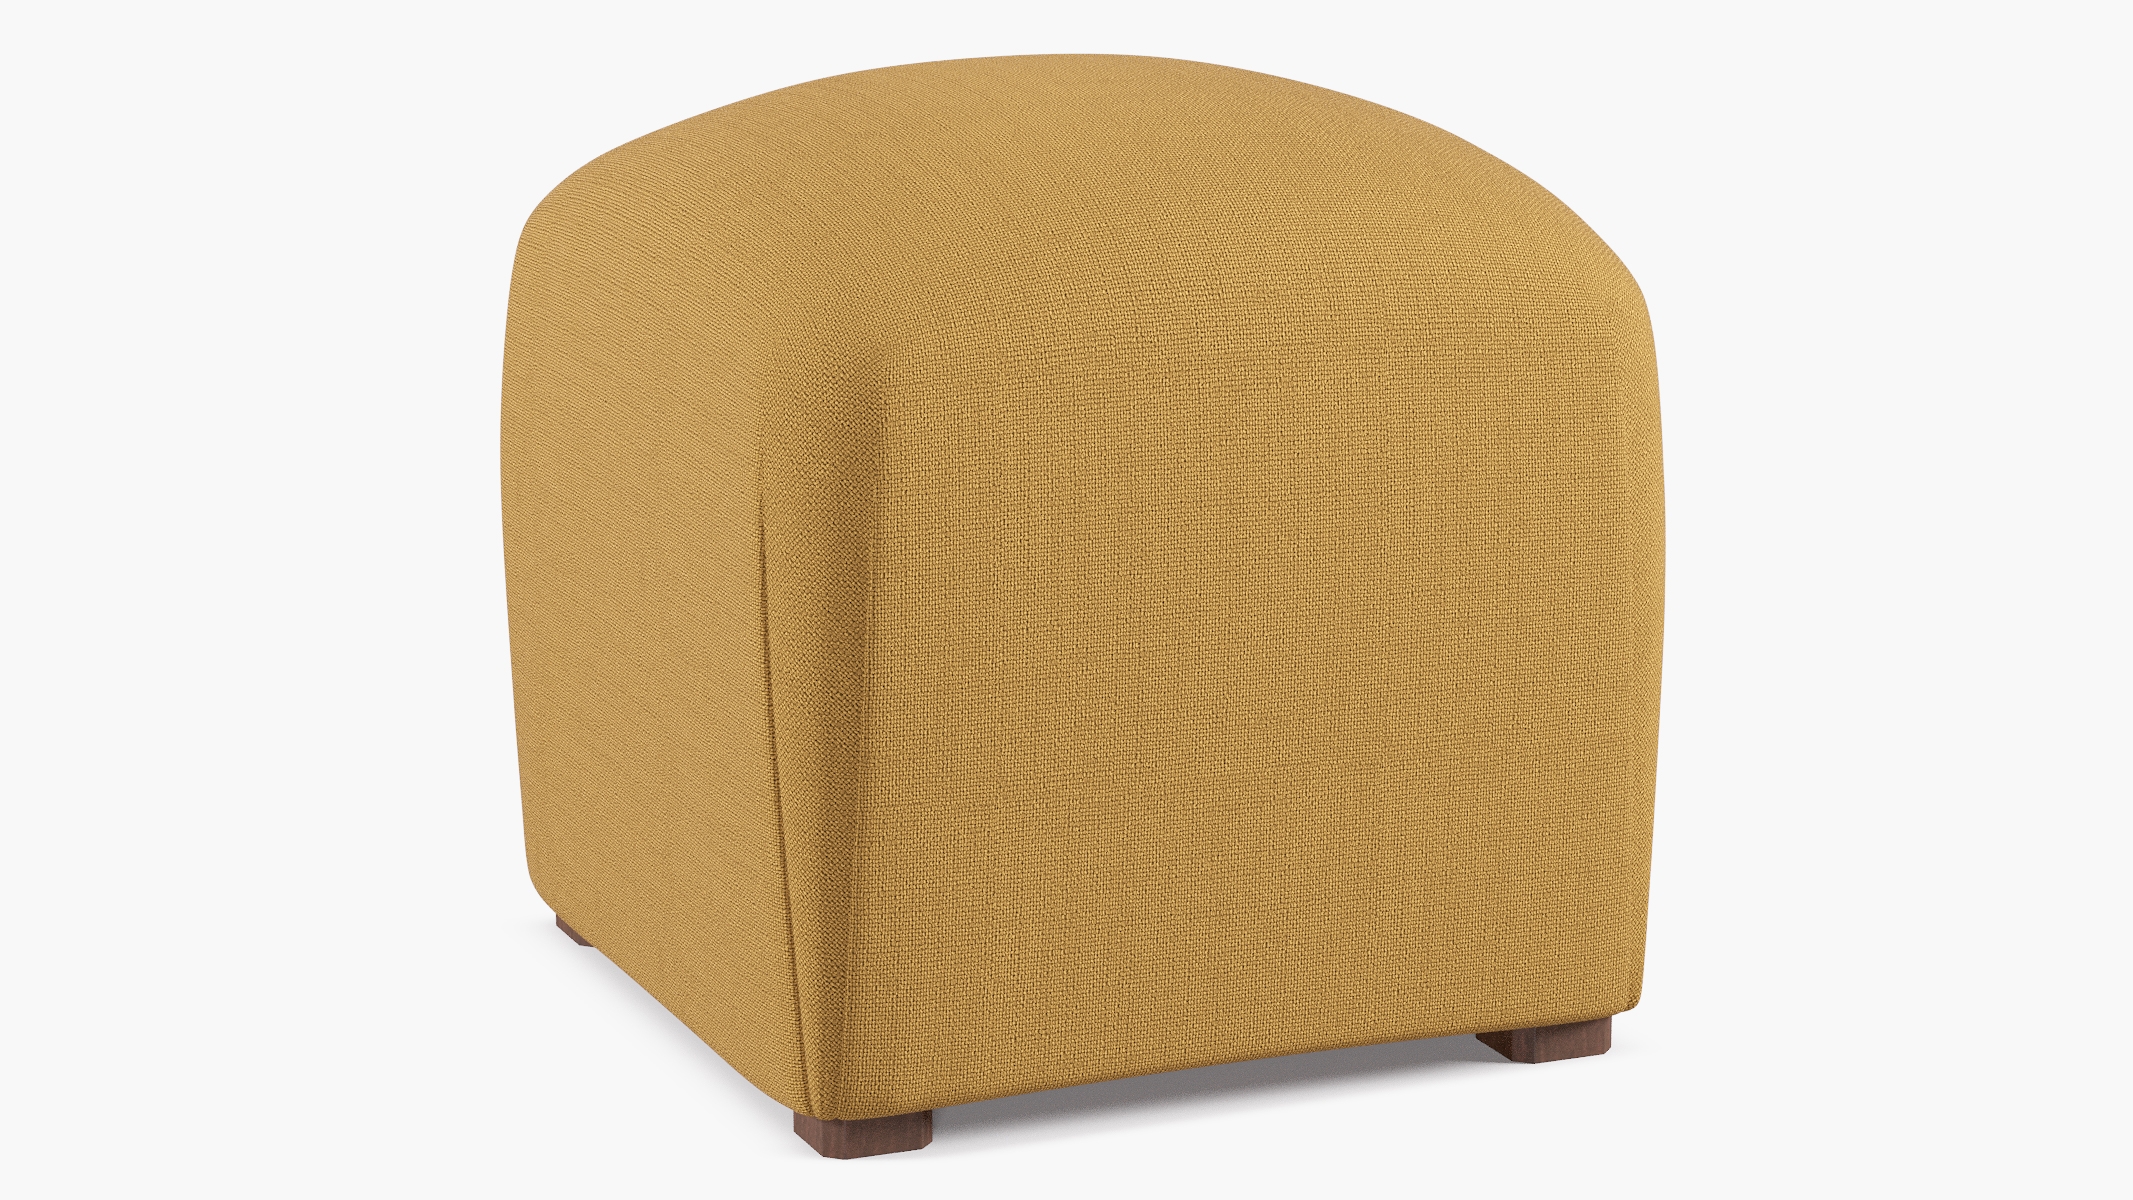 Deco Ottoman, French Yellow Everyday Linen - Image 1